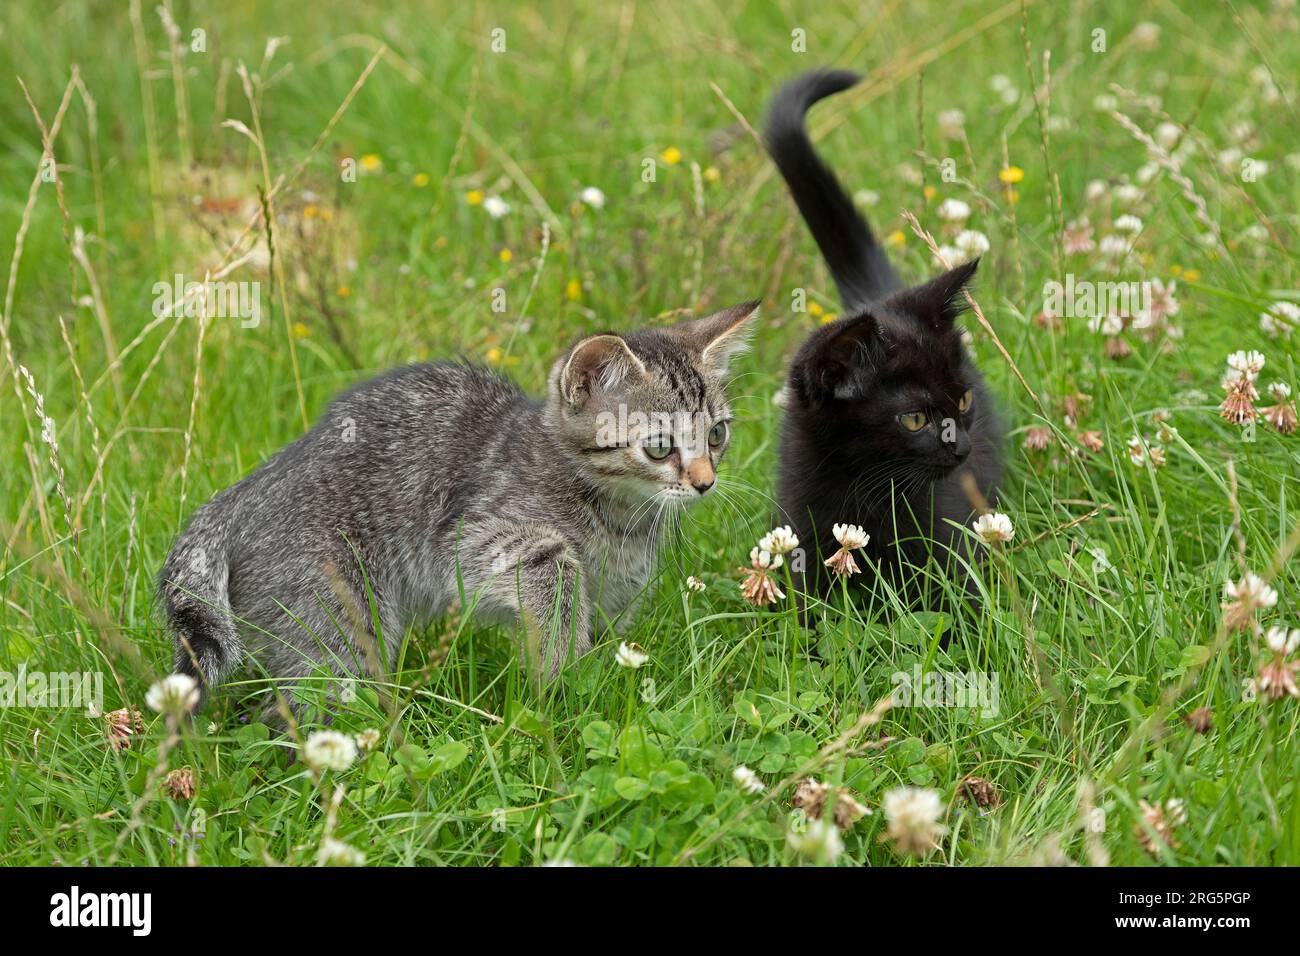 Two nine weeks old kittens sitting in grass together, Germany Stock Photo